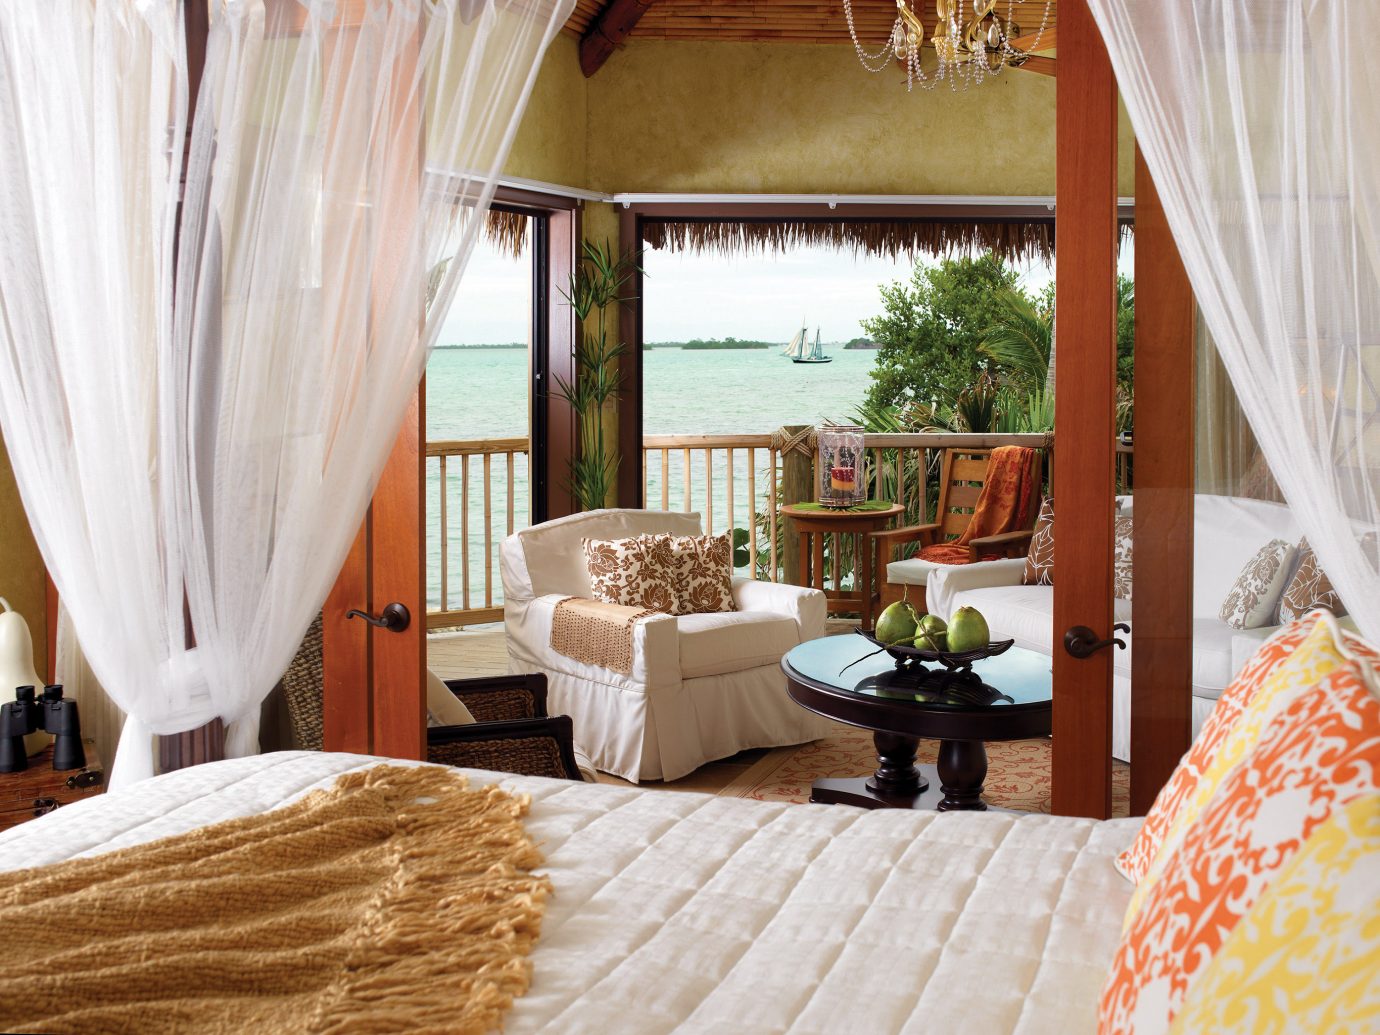 Beach Beachfront Bedroom Hotels Island Resort Romance Romantic Scenic views Waterfront indoor curtain bed room property interior design cottage home Suite estate Villa living room real estate farmhouse furniture decorated